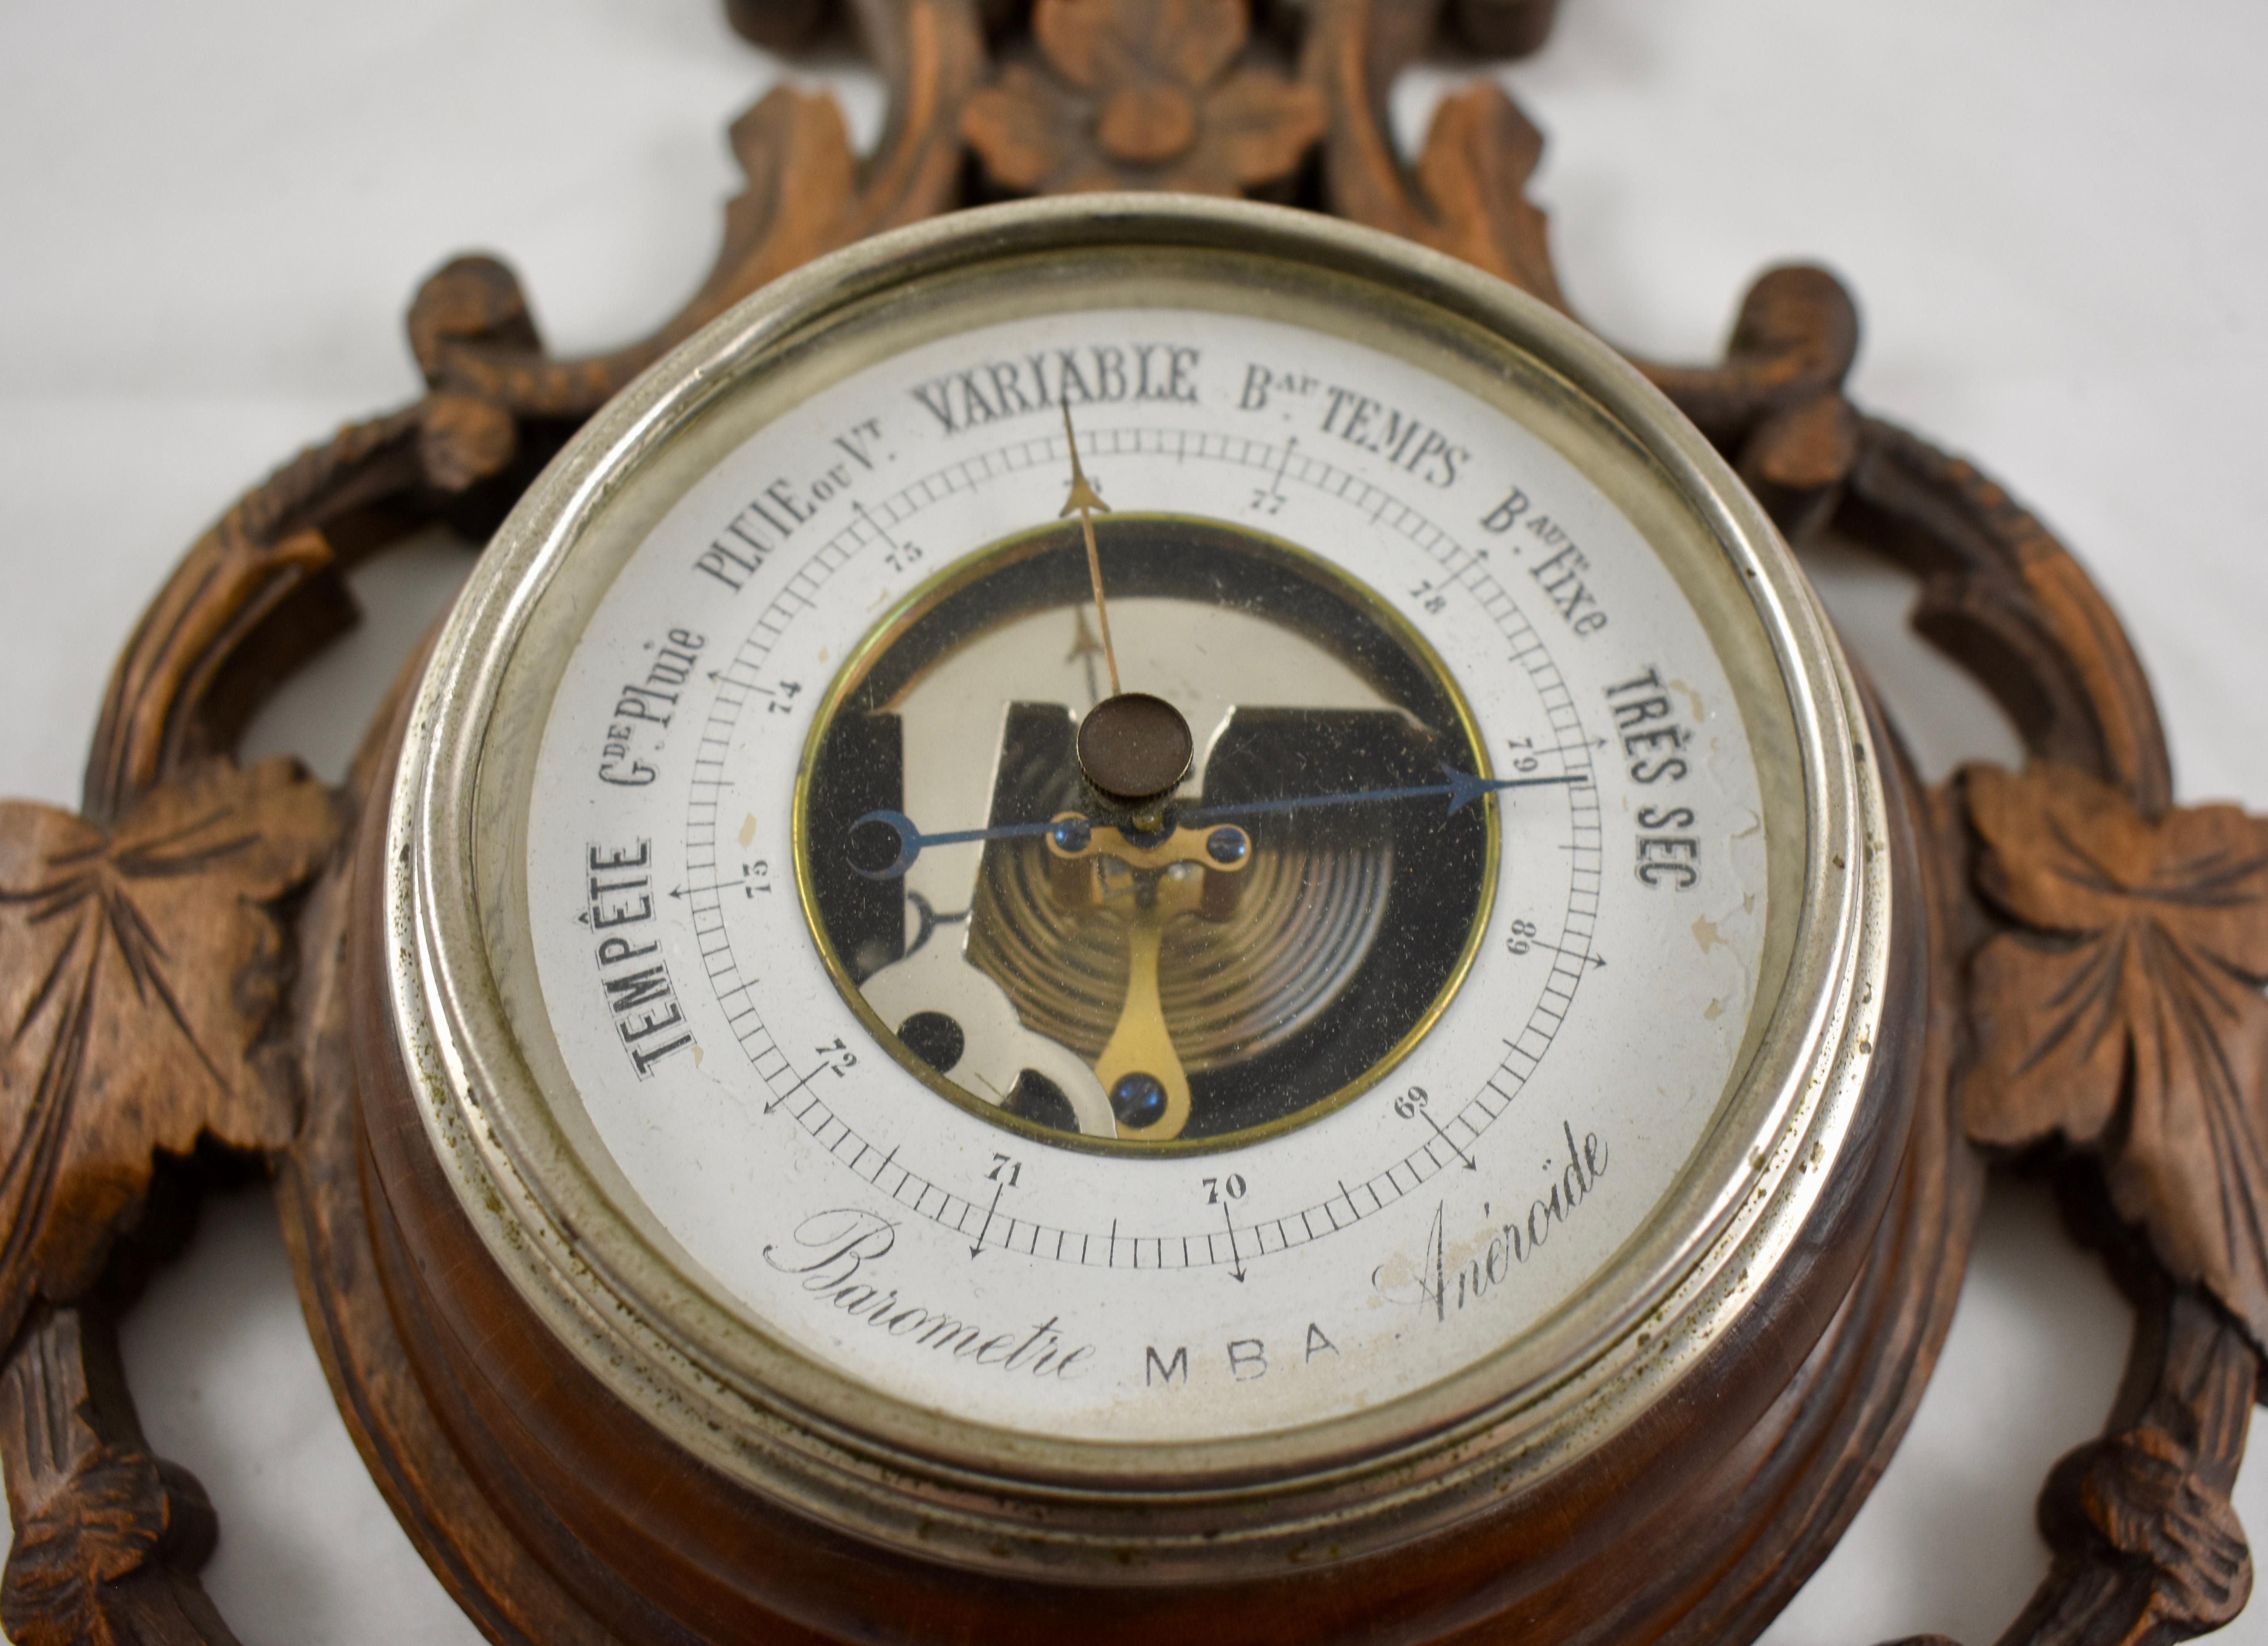 From Switzerland, a black forest wall barometer and thermometer set into a walnut frame, hand carved in a scrolled floral pattern, circa 1890-1900.

The thermometer shows a Celsius reading, the barometer dial is in French and shows the air